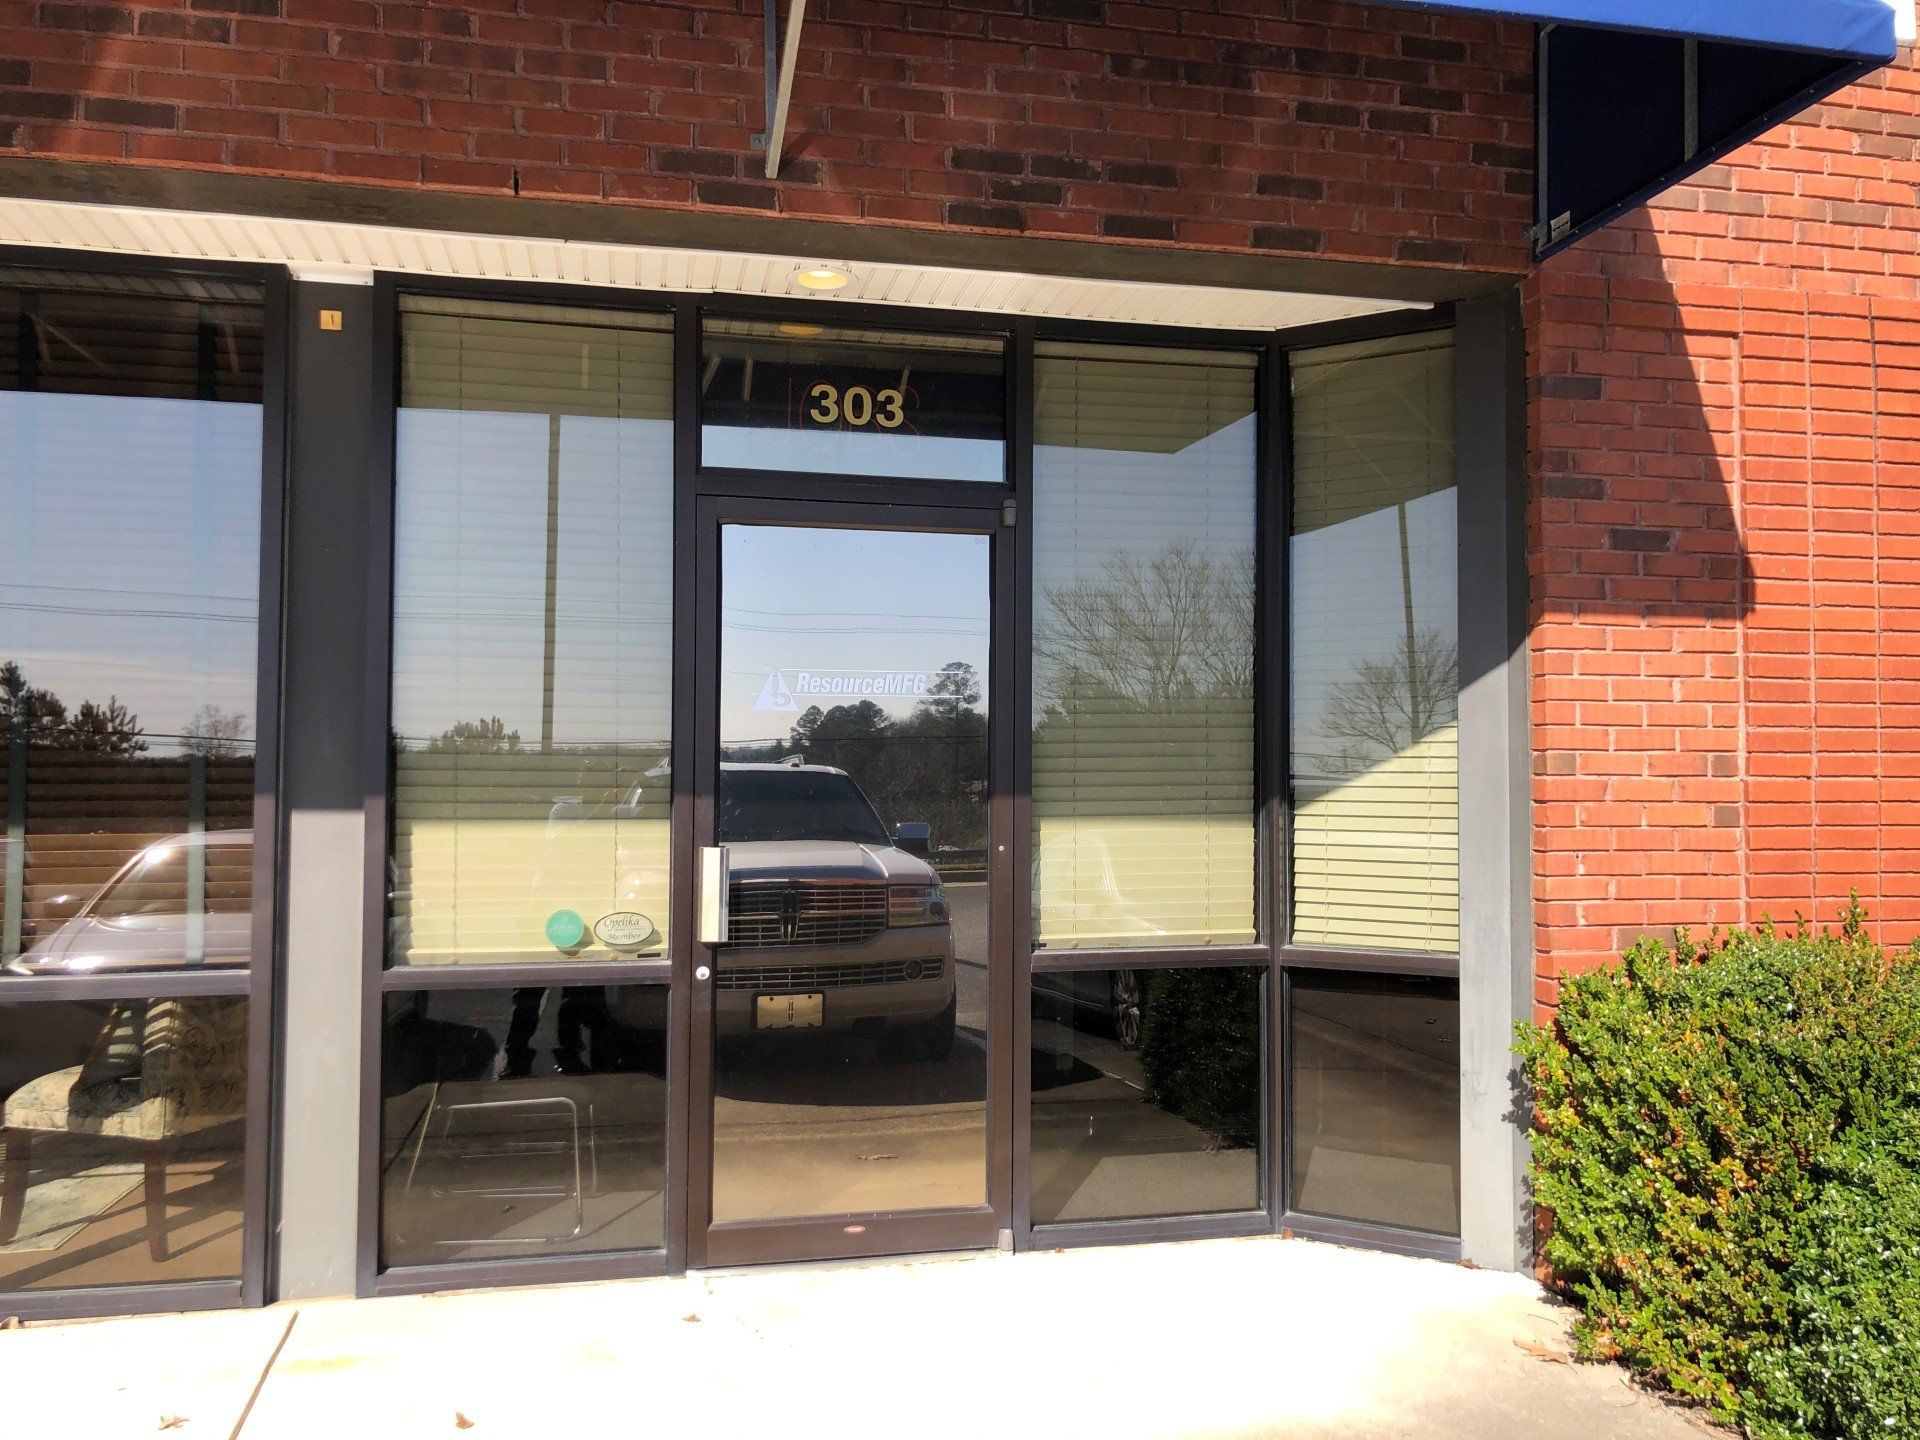 Office Window Tinting in Auburn, AL - SPF Office Tint was installed to the door and transom window. Ending bright Sun glare in Auburn AL